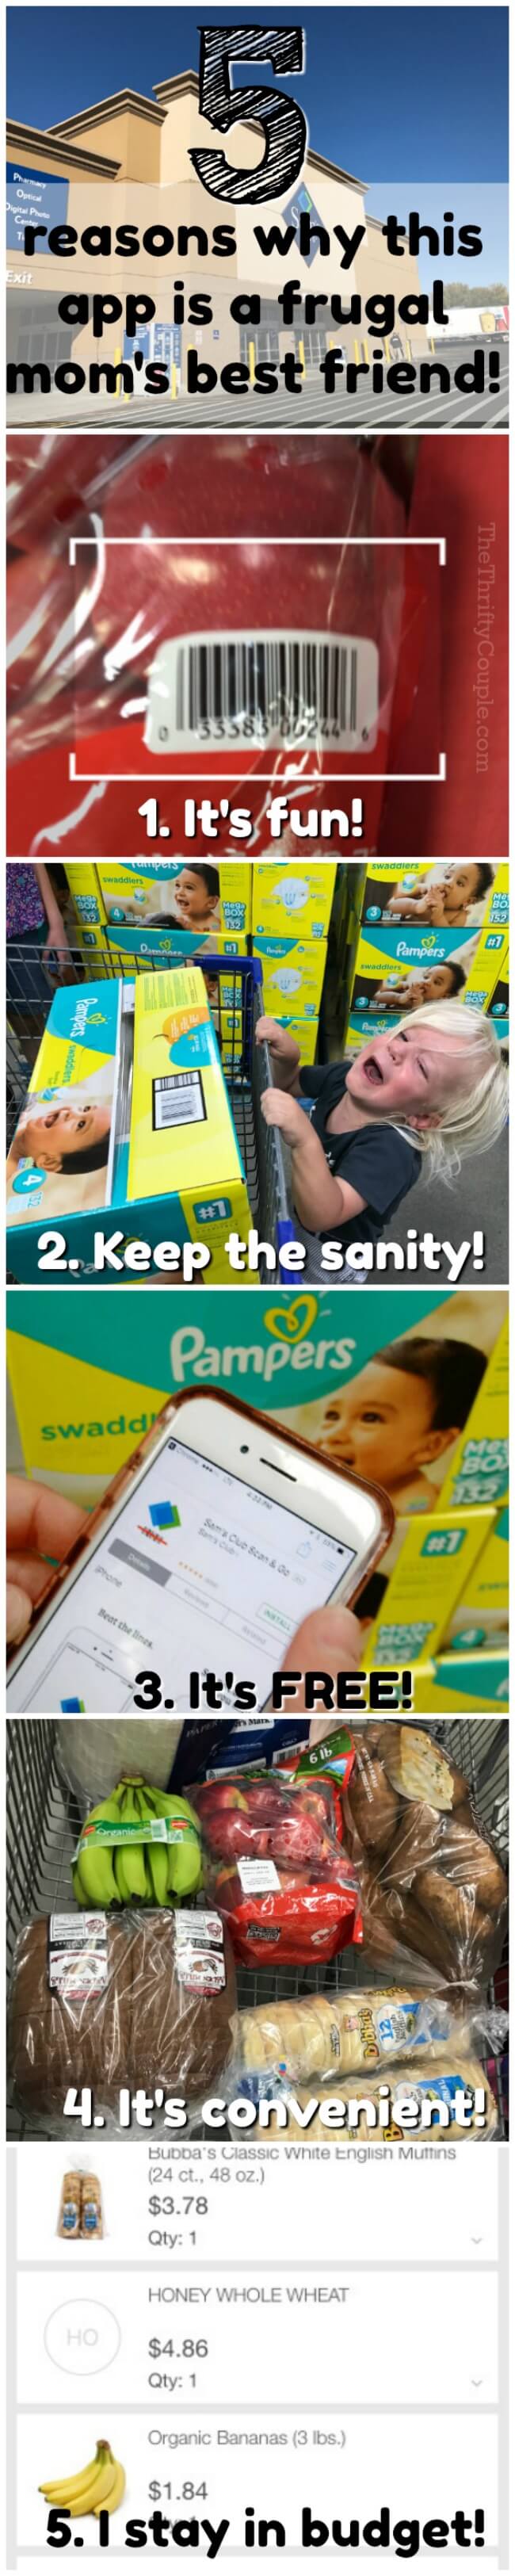 Sam's Club Scan and Go App